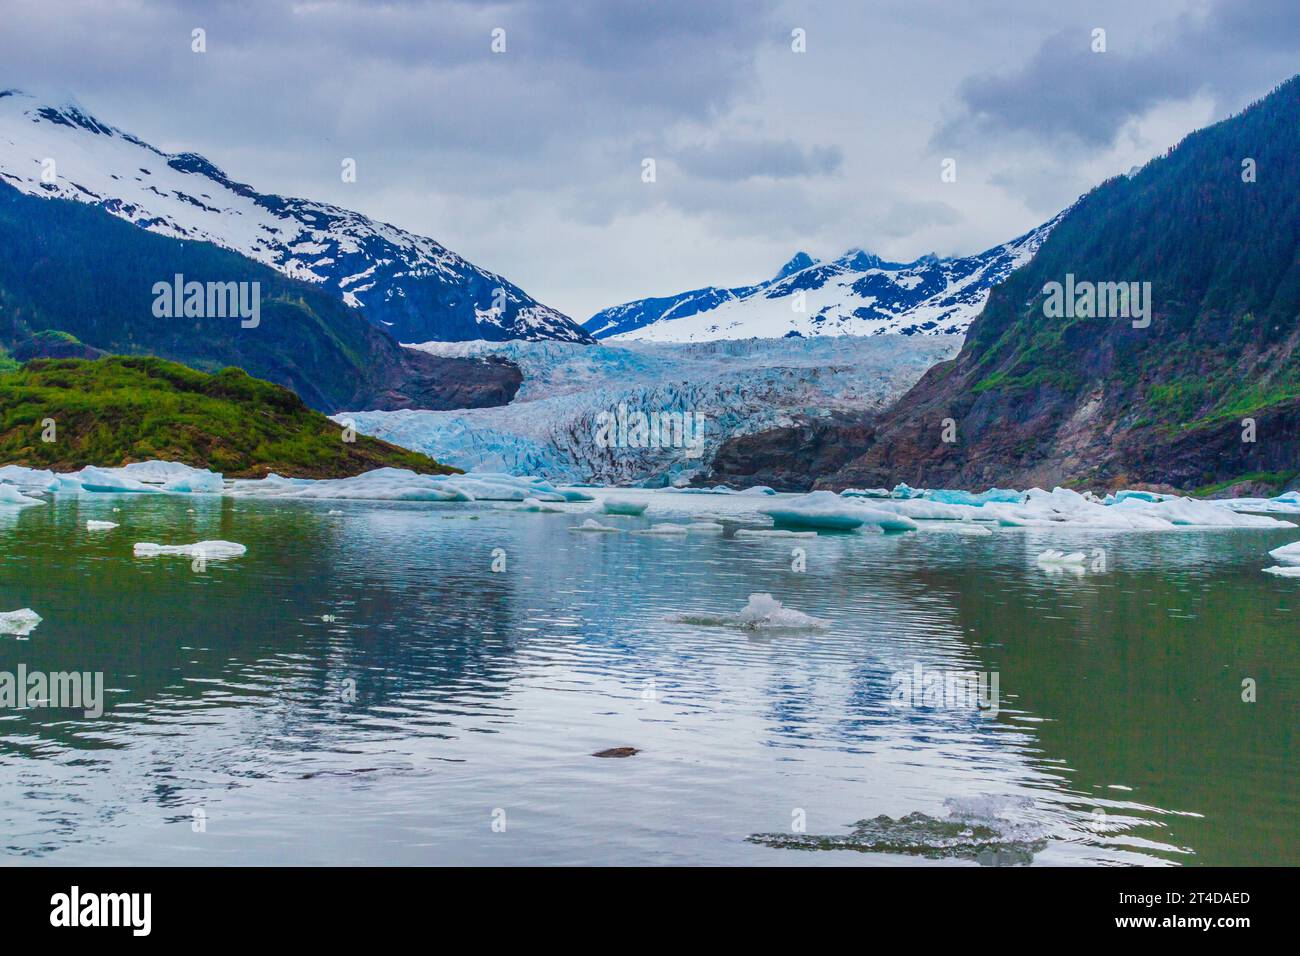 Mendenhall Glacier is about a 12 mile long glacier in Mendenhall Valley, about 12 miles  from downtown Juneau. It is a major tourist attraction. Stock Photo